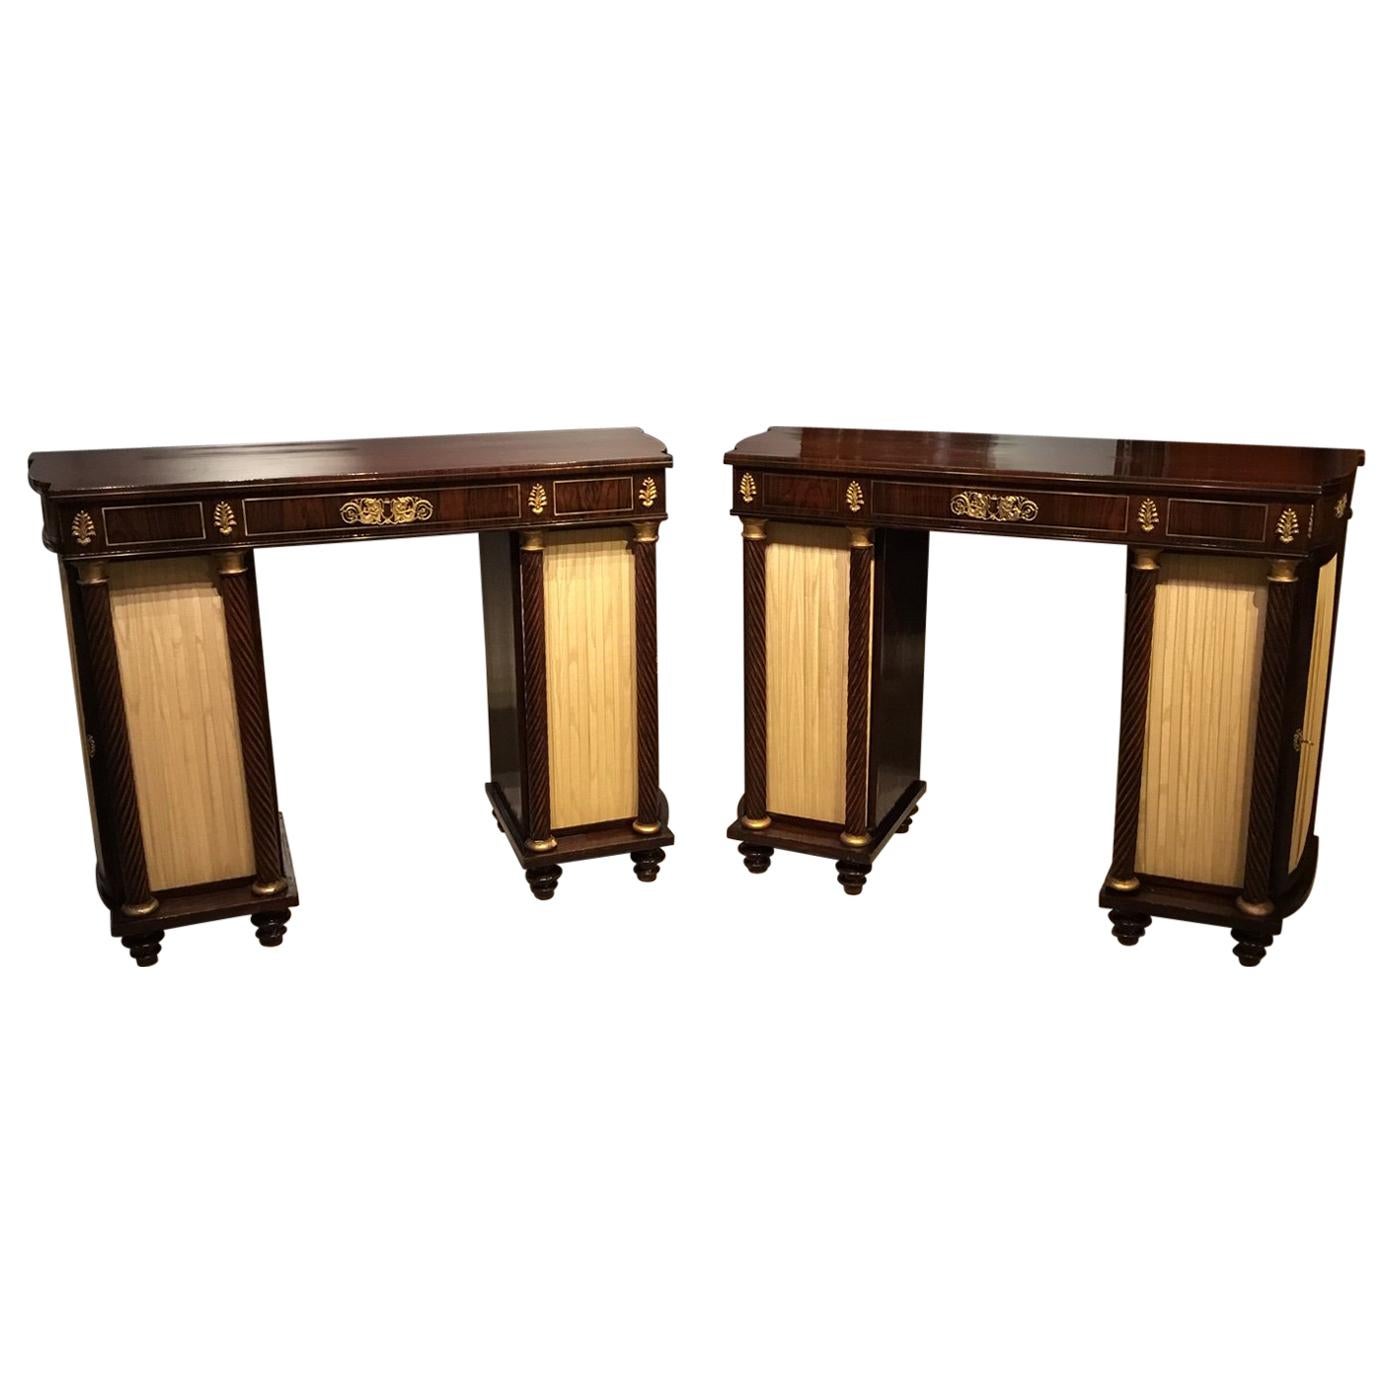 Pair of Brass Inlaid Regency Period Antique Side Cabinets